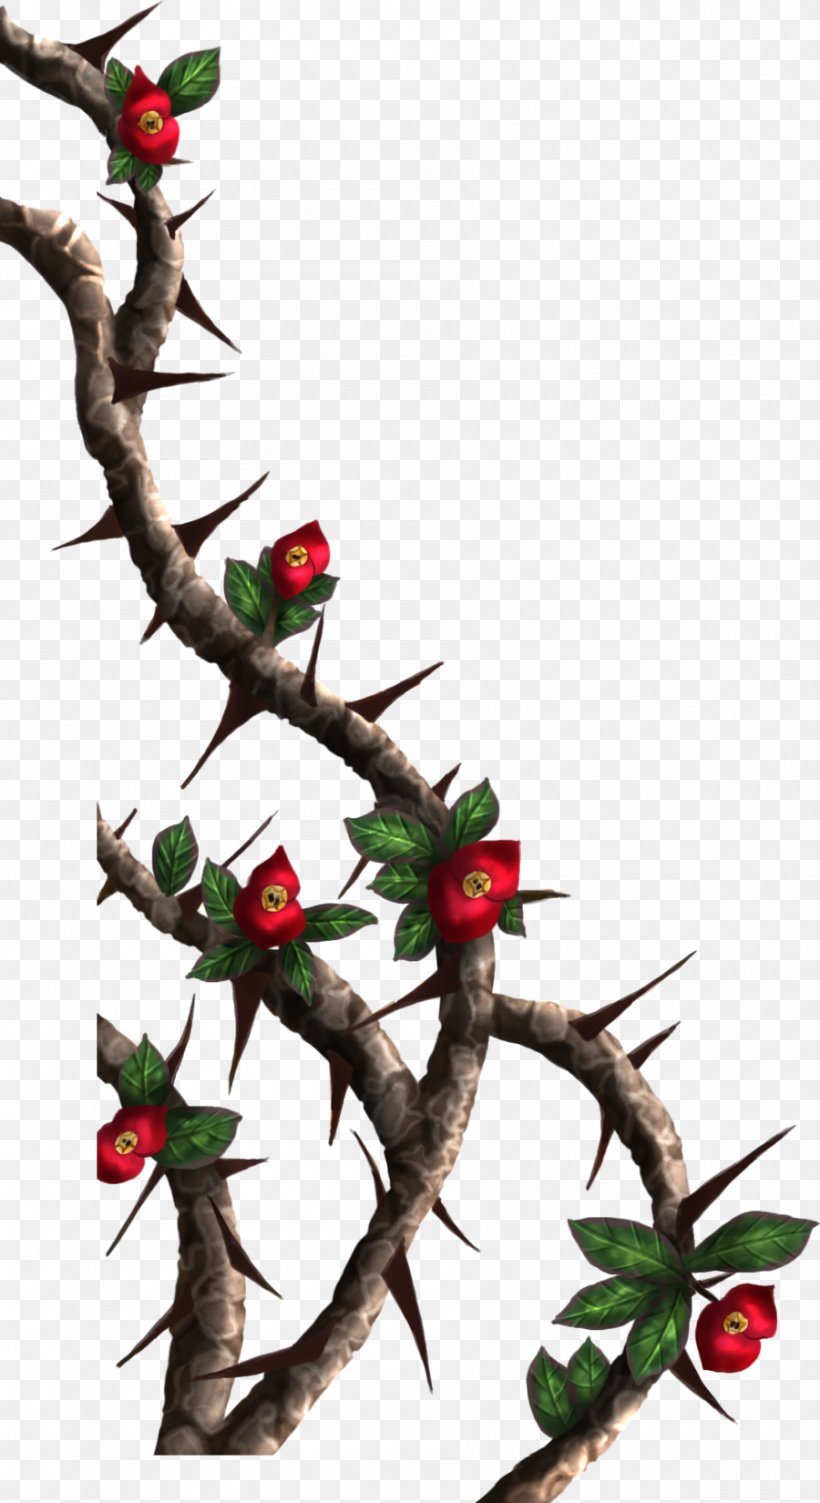 Thorns, Spines, And Prickles Rose Crown Of Thorns Drawing Clip Art, PNG, 900x1650px, Thorns Spines And Prickles, Aquifoliaceae, Aquifoliales, Art, Branch Download Free